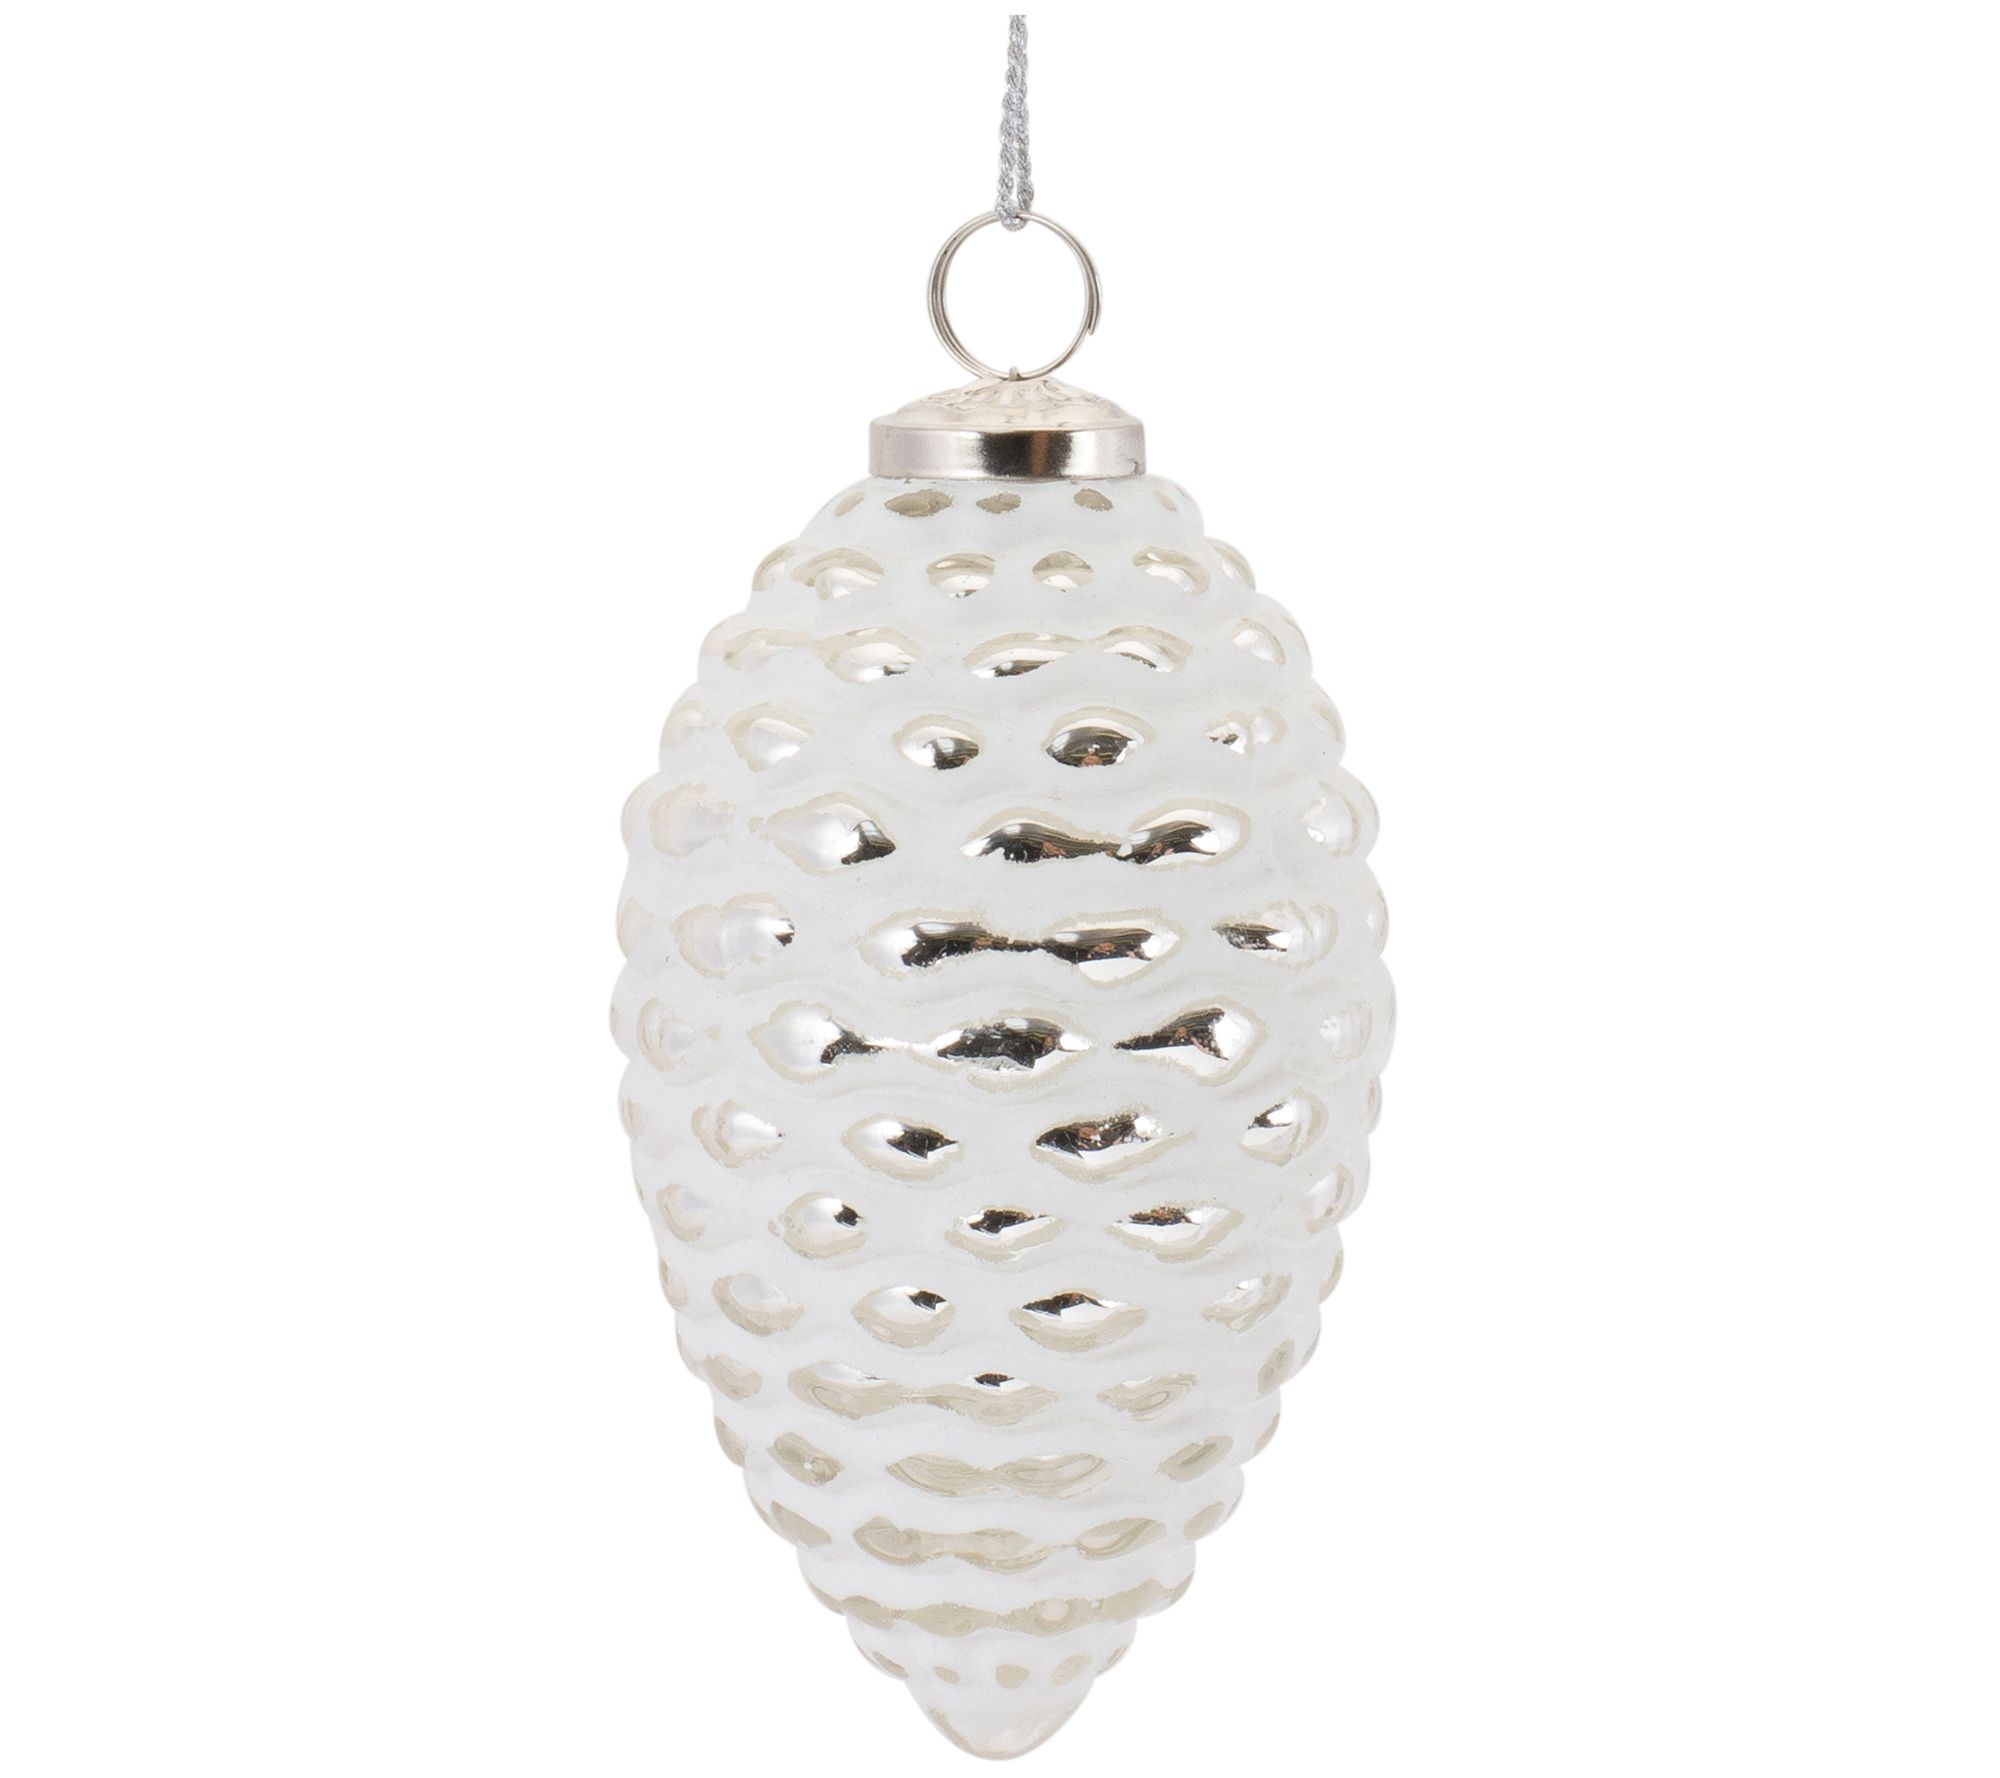 Melrose Frosted Glass Pinecone Ornament (Set of 4) - QVC.com